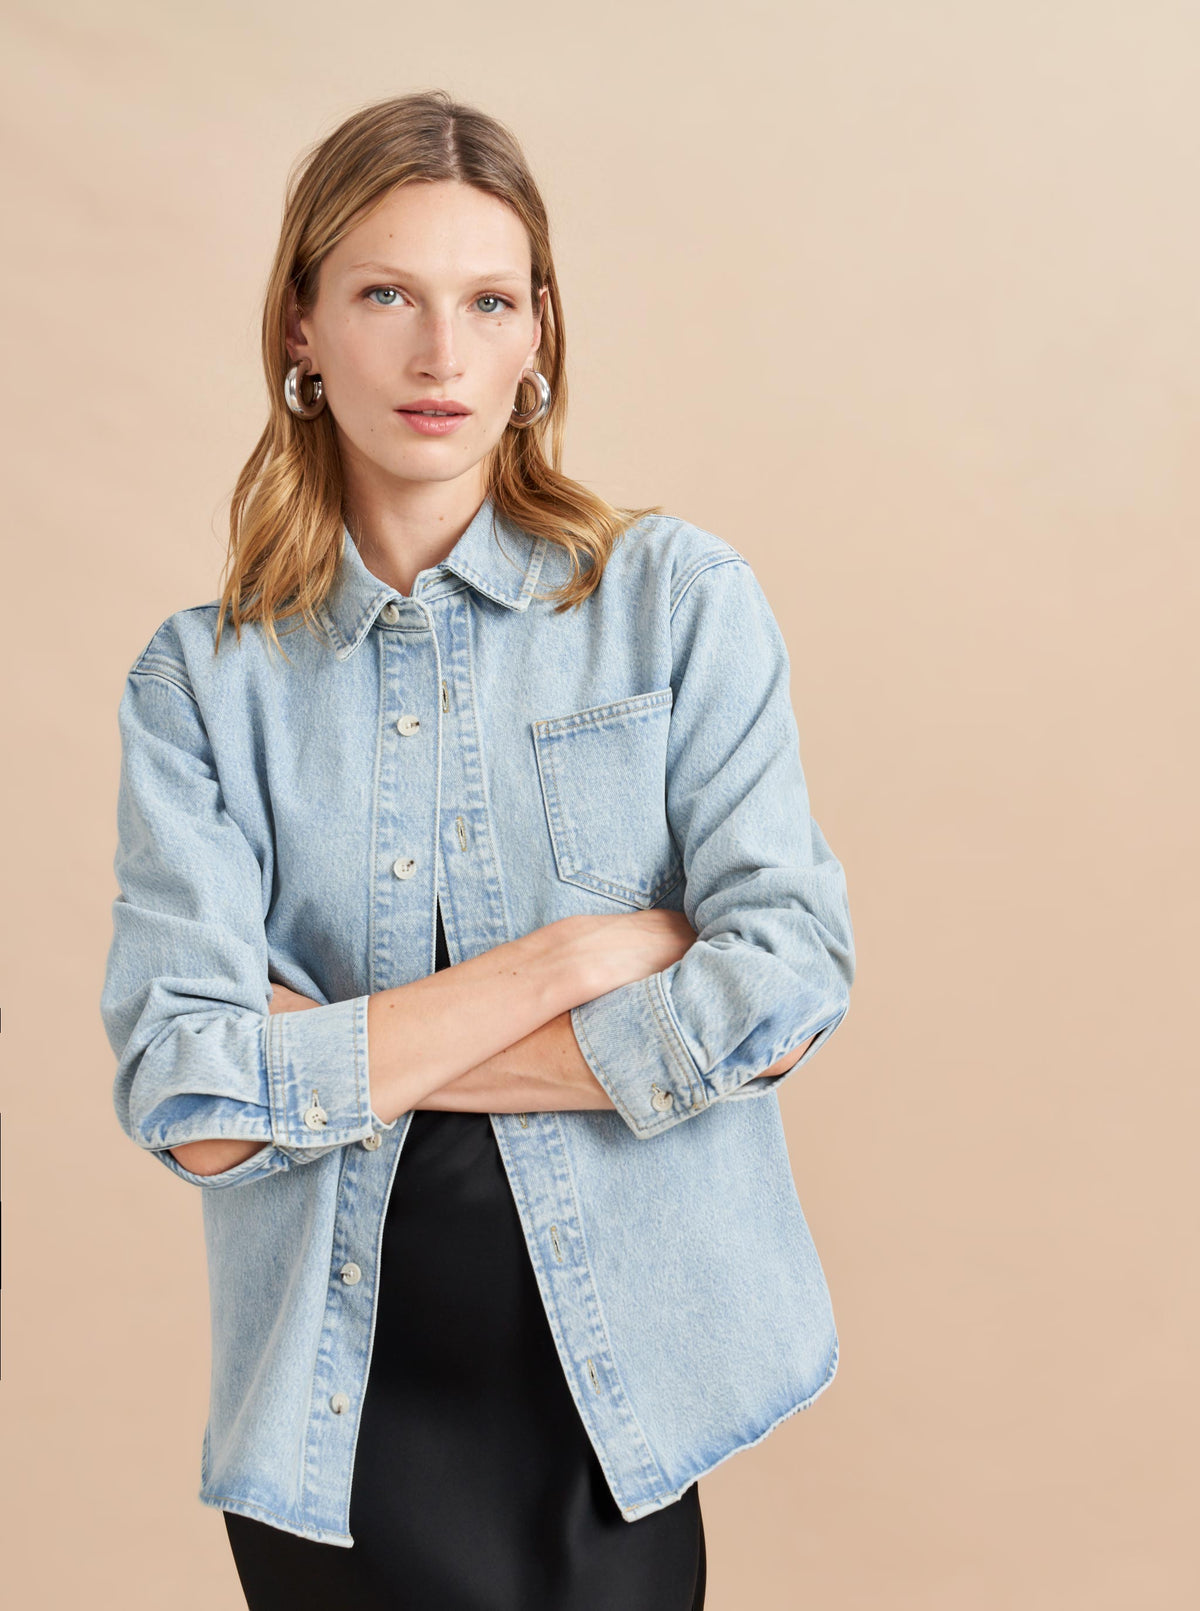 Denim just makes everything better and a classic, denim button up is one of those pieces. When not wearing it back to other jeans, be sure to style it with your favorite dress or trouser for a hint of the unexpected. And just like your favorite jeans, this shirt will get softer and cooler with each wear.